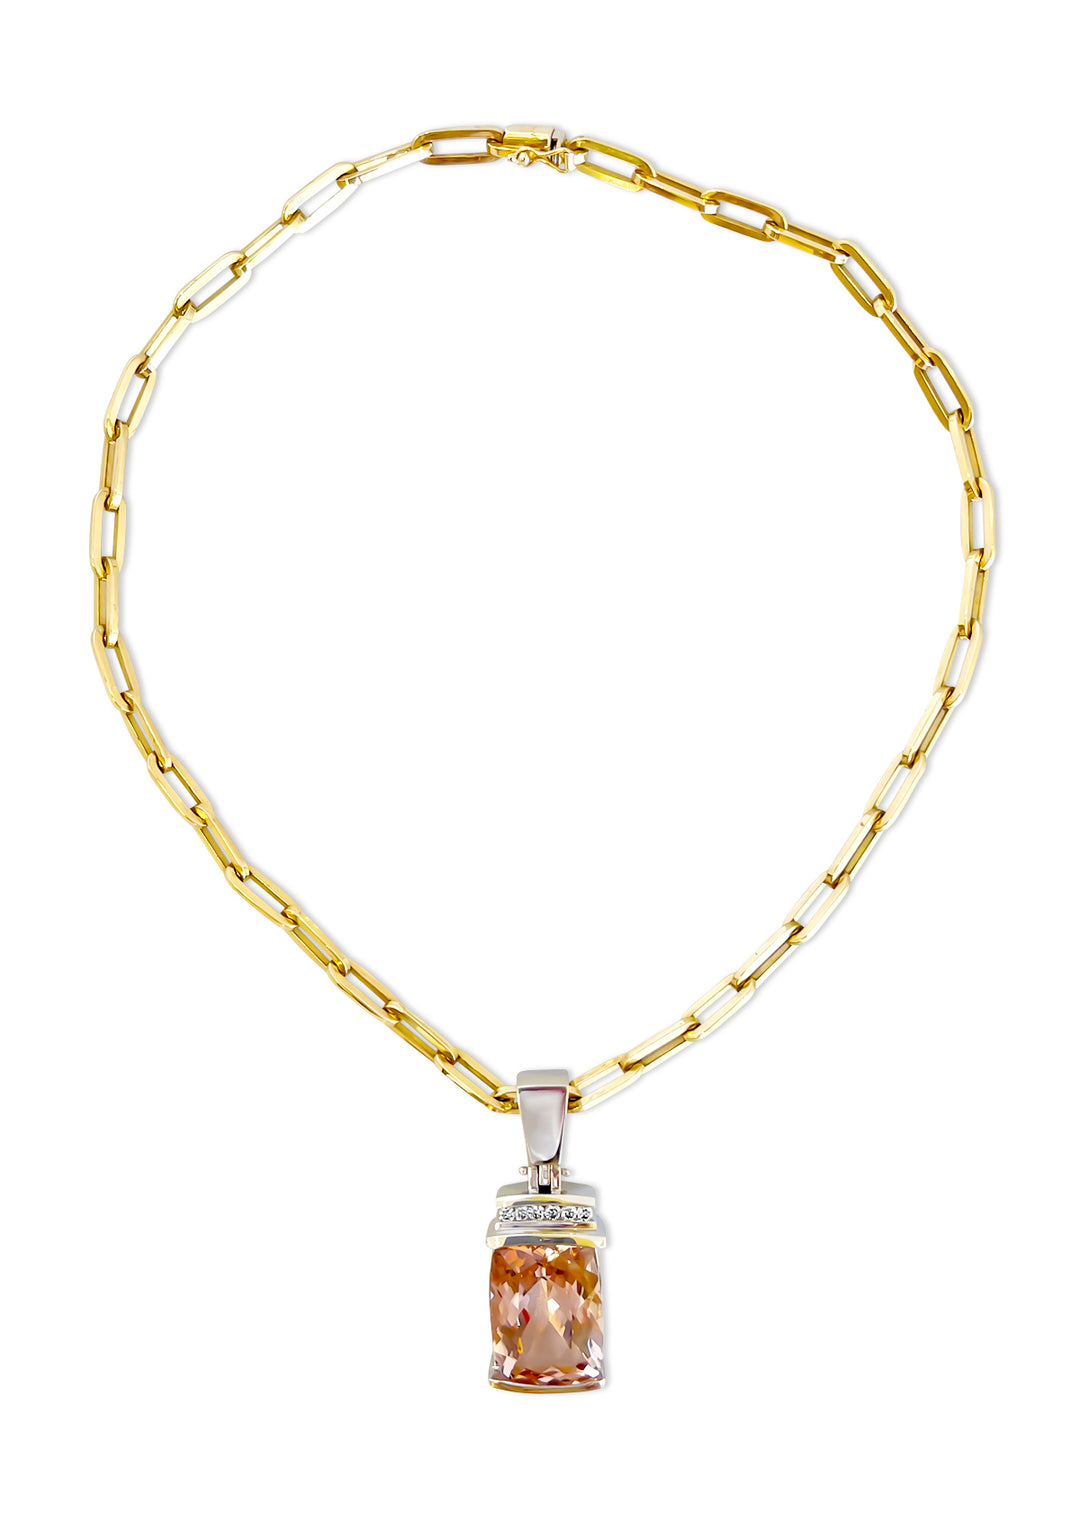 14K White Gold 28.72 Carat Morganite And Diamond Pendant With 14K Yellow Gold Paperclip Chain Necklace